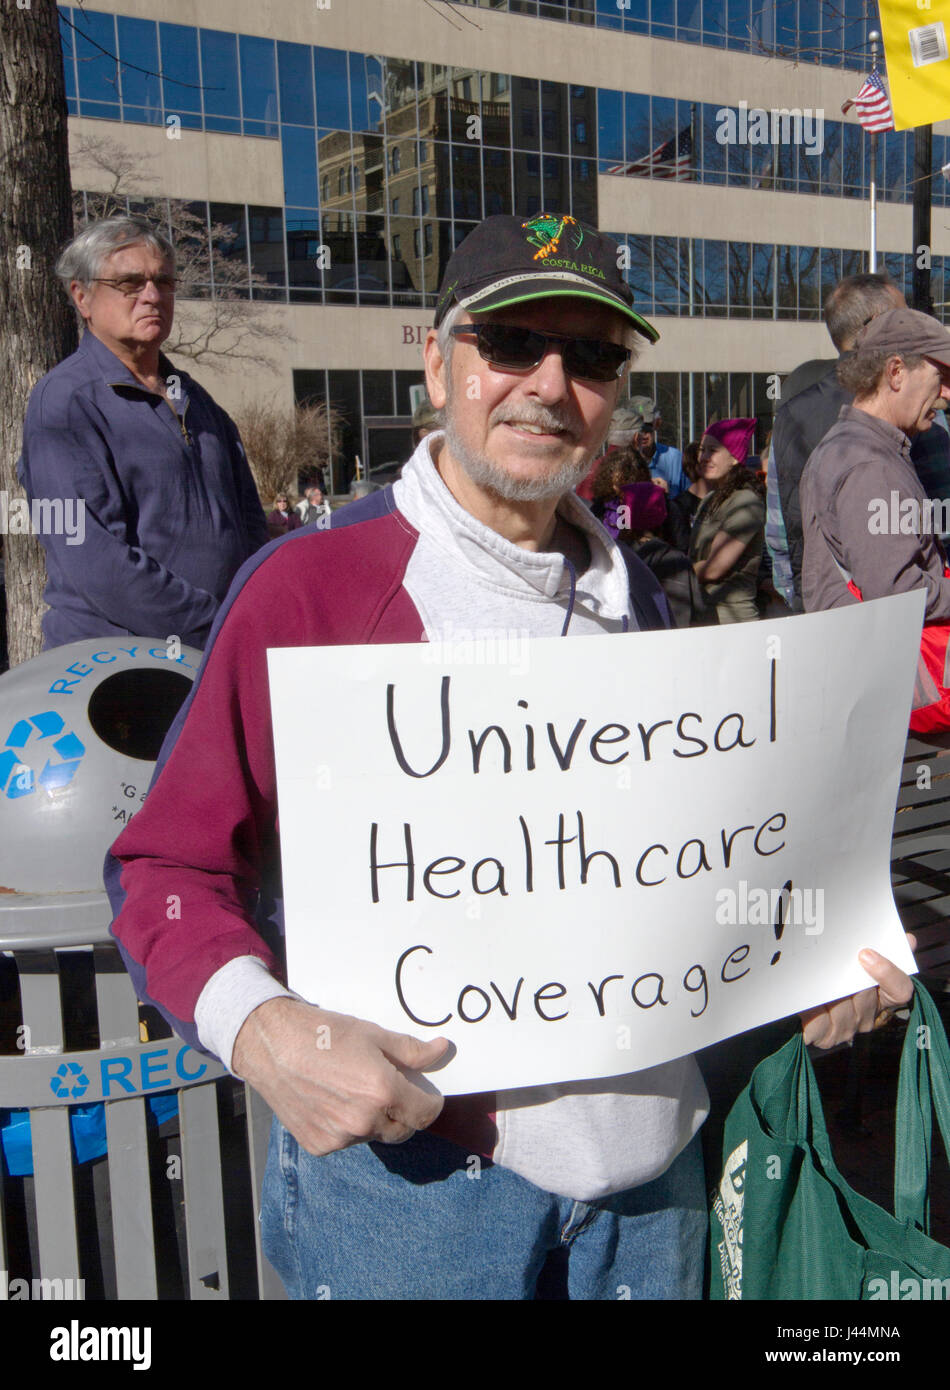 Asheville, North Carolina, USA - February 25, 2017: A man holds a sign saying 'Universal Healthcare Coverage' at an Obamacare (Affordable Care Act) ra Stock Photo